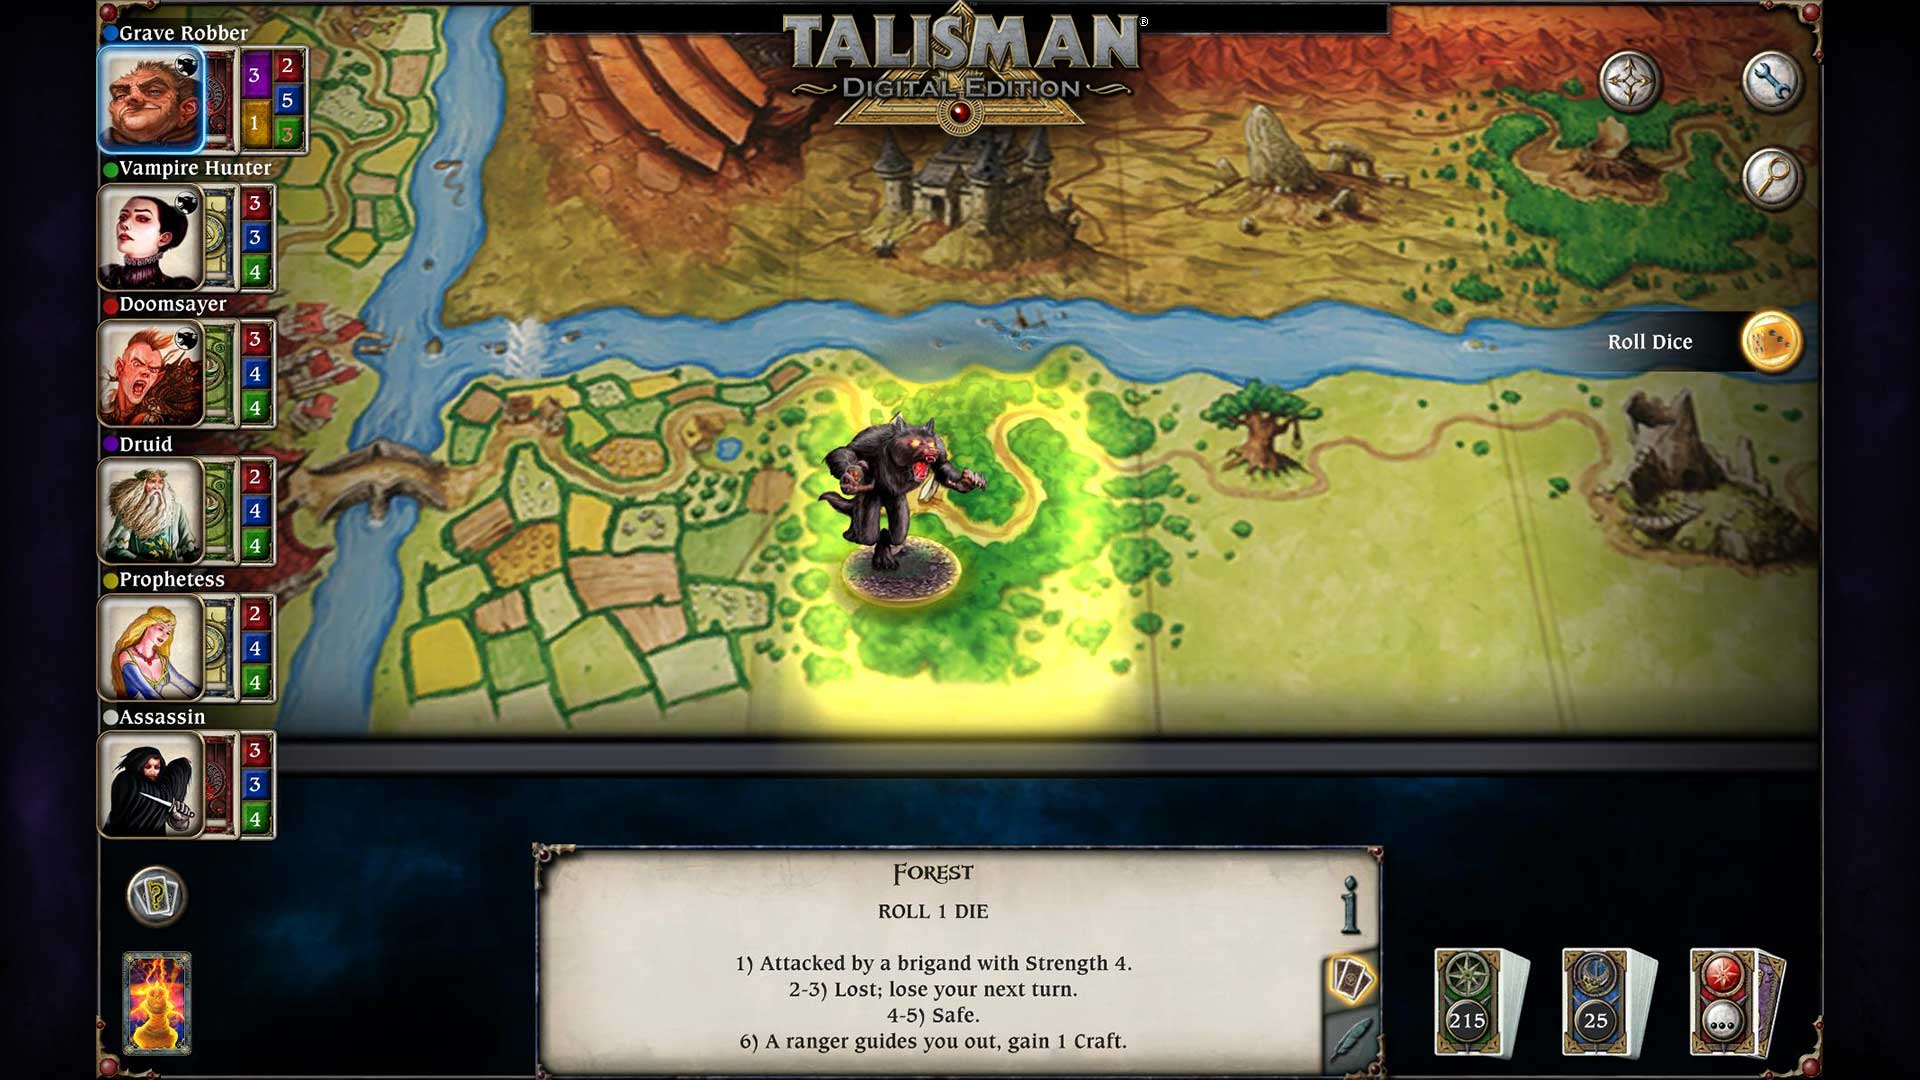 Talisman - The Blood Moon Expansion Featured Screenshot #1